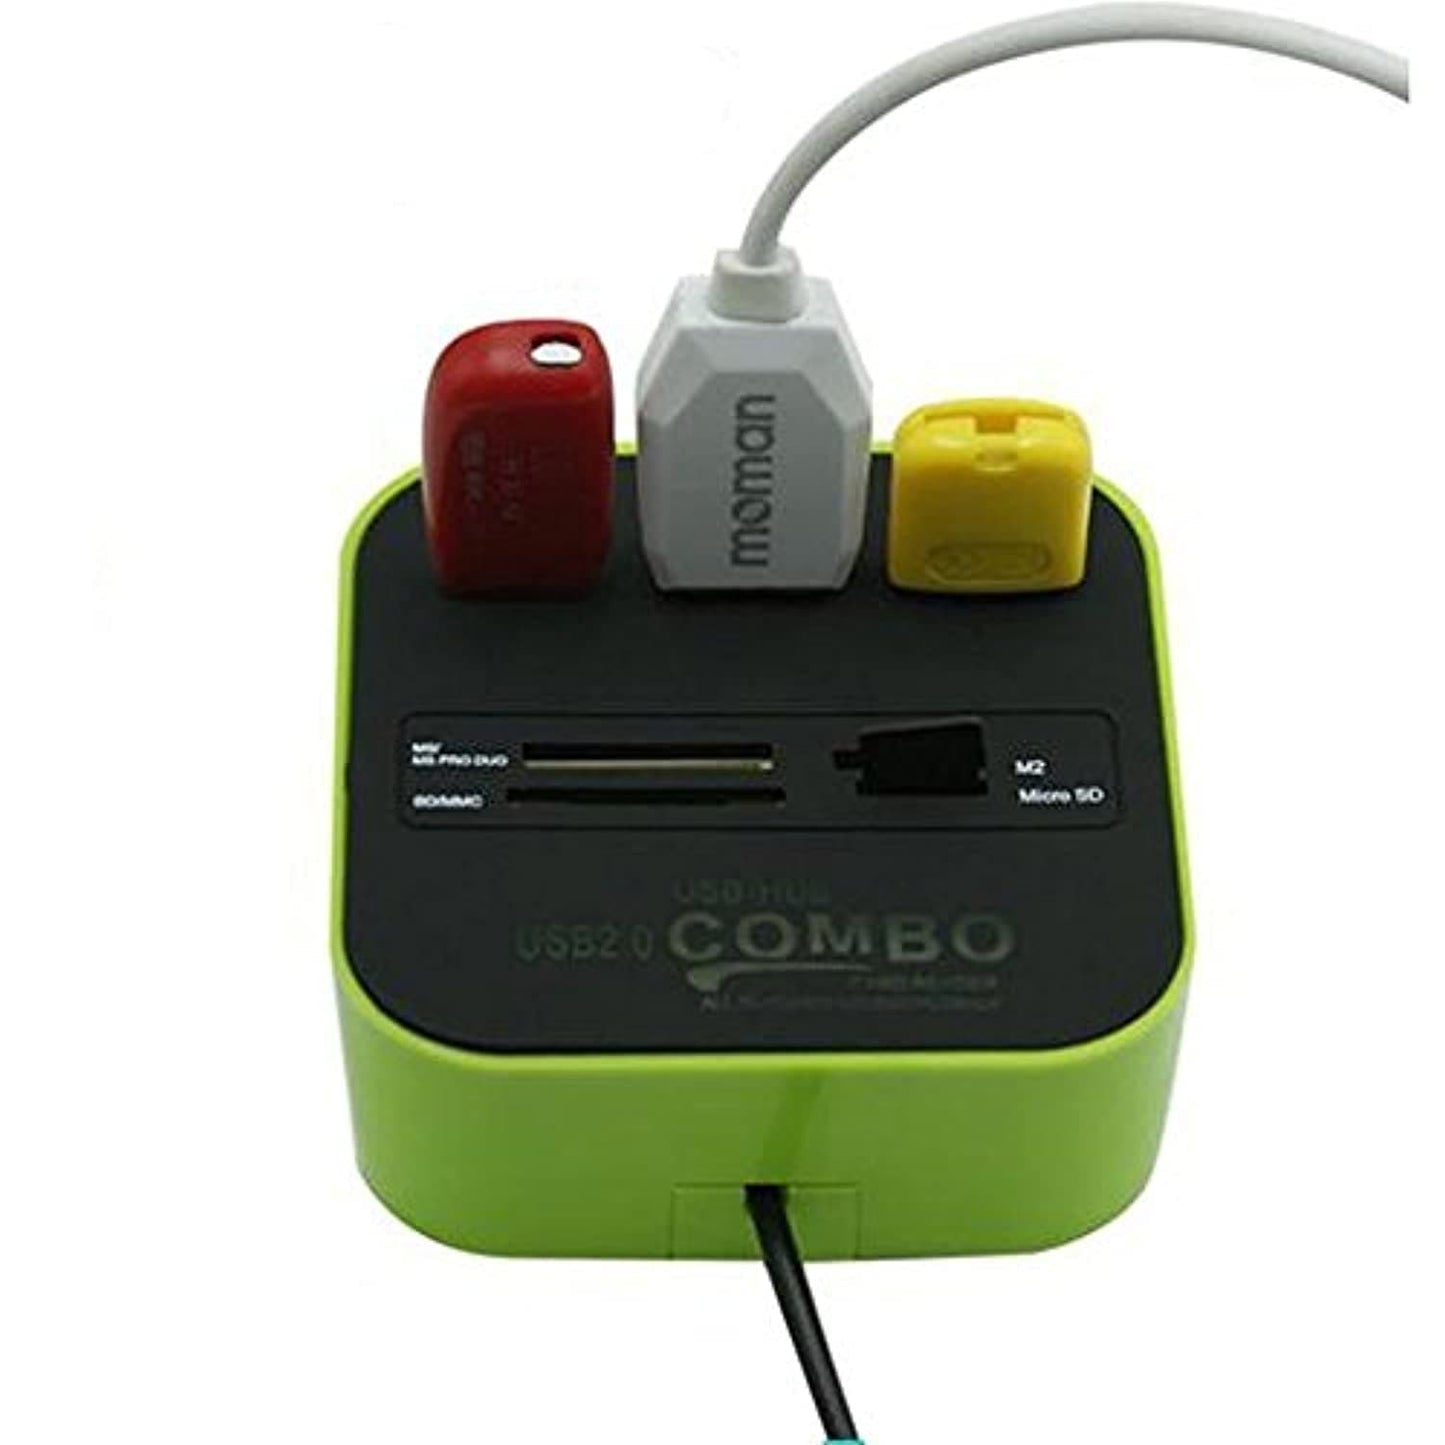 All in One Combo Card Reader